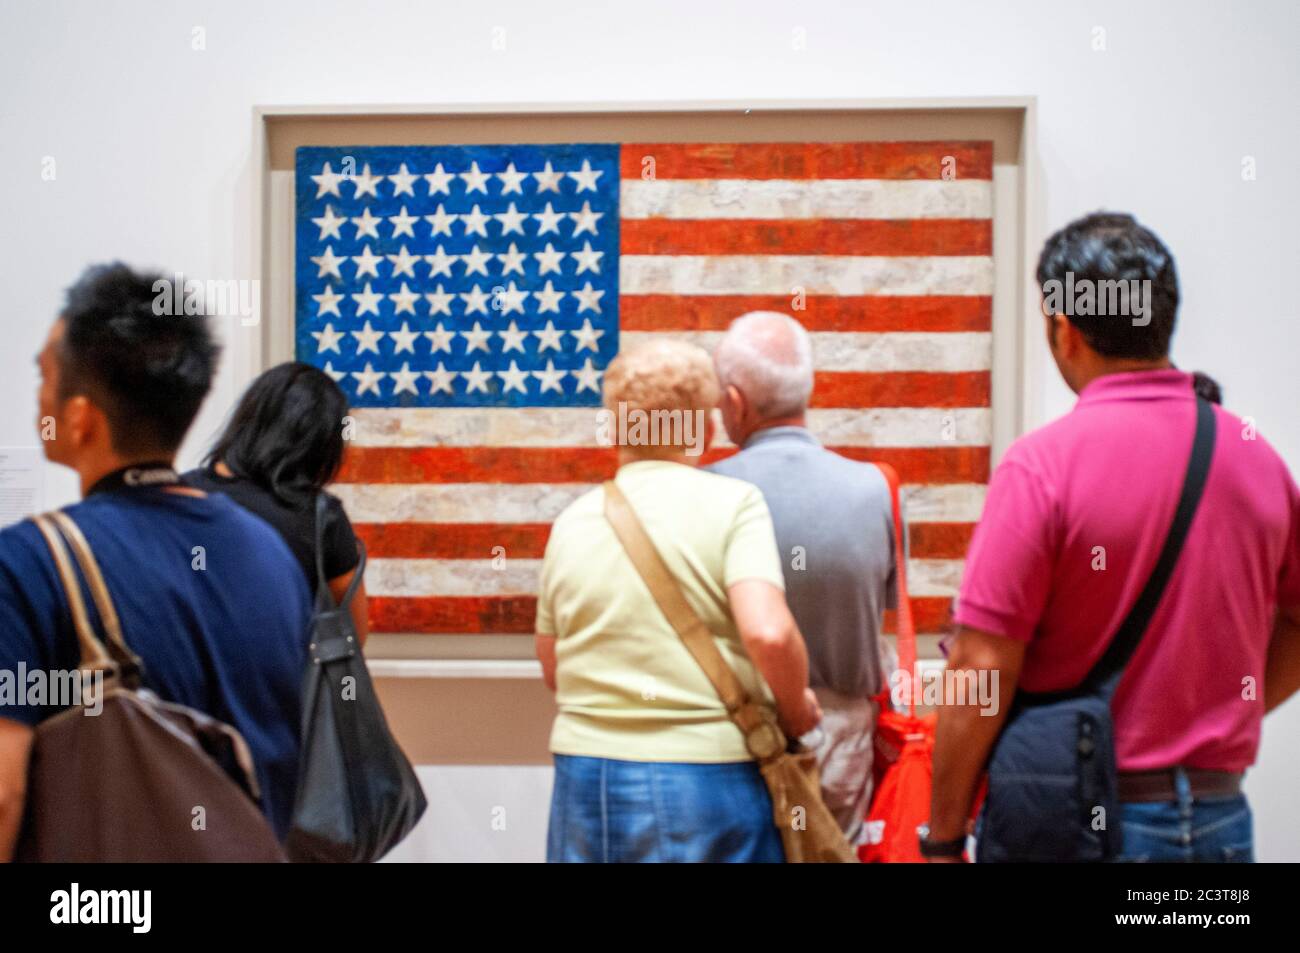 Jasper Johns's in the Flag painting, The Museum of Modern Art, MoMA, New York City, United States of America Stock Photo